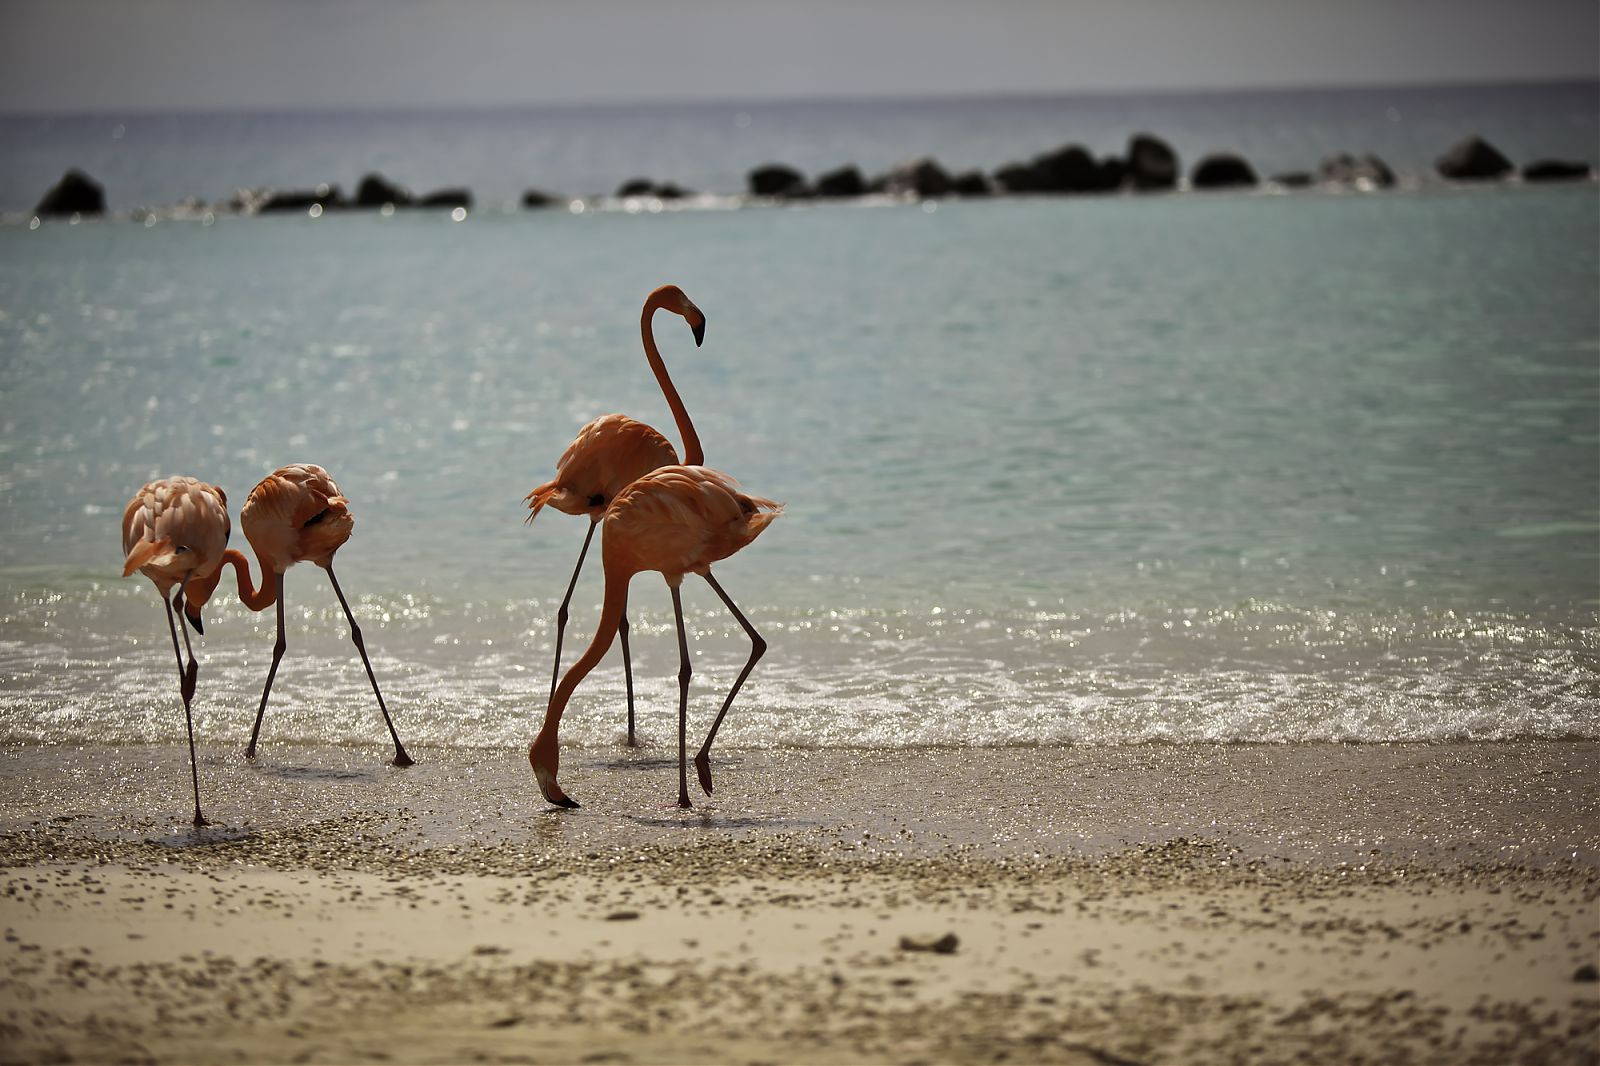 Flight Deal: Fly To Aruba Non-Stop For As Low As $168